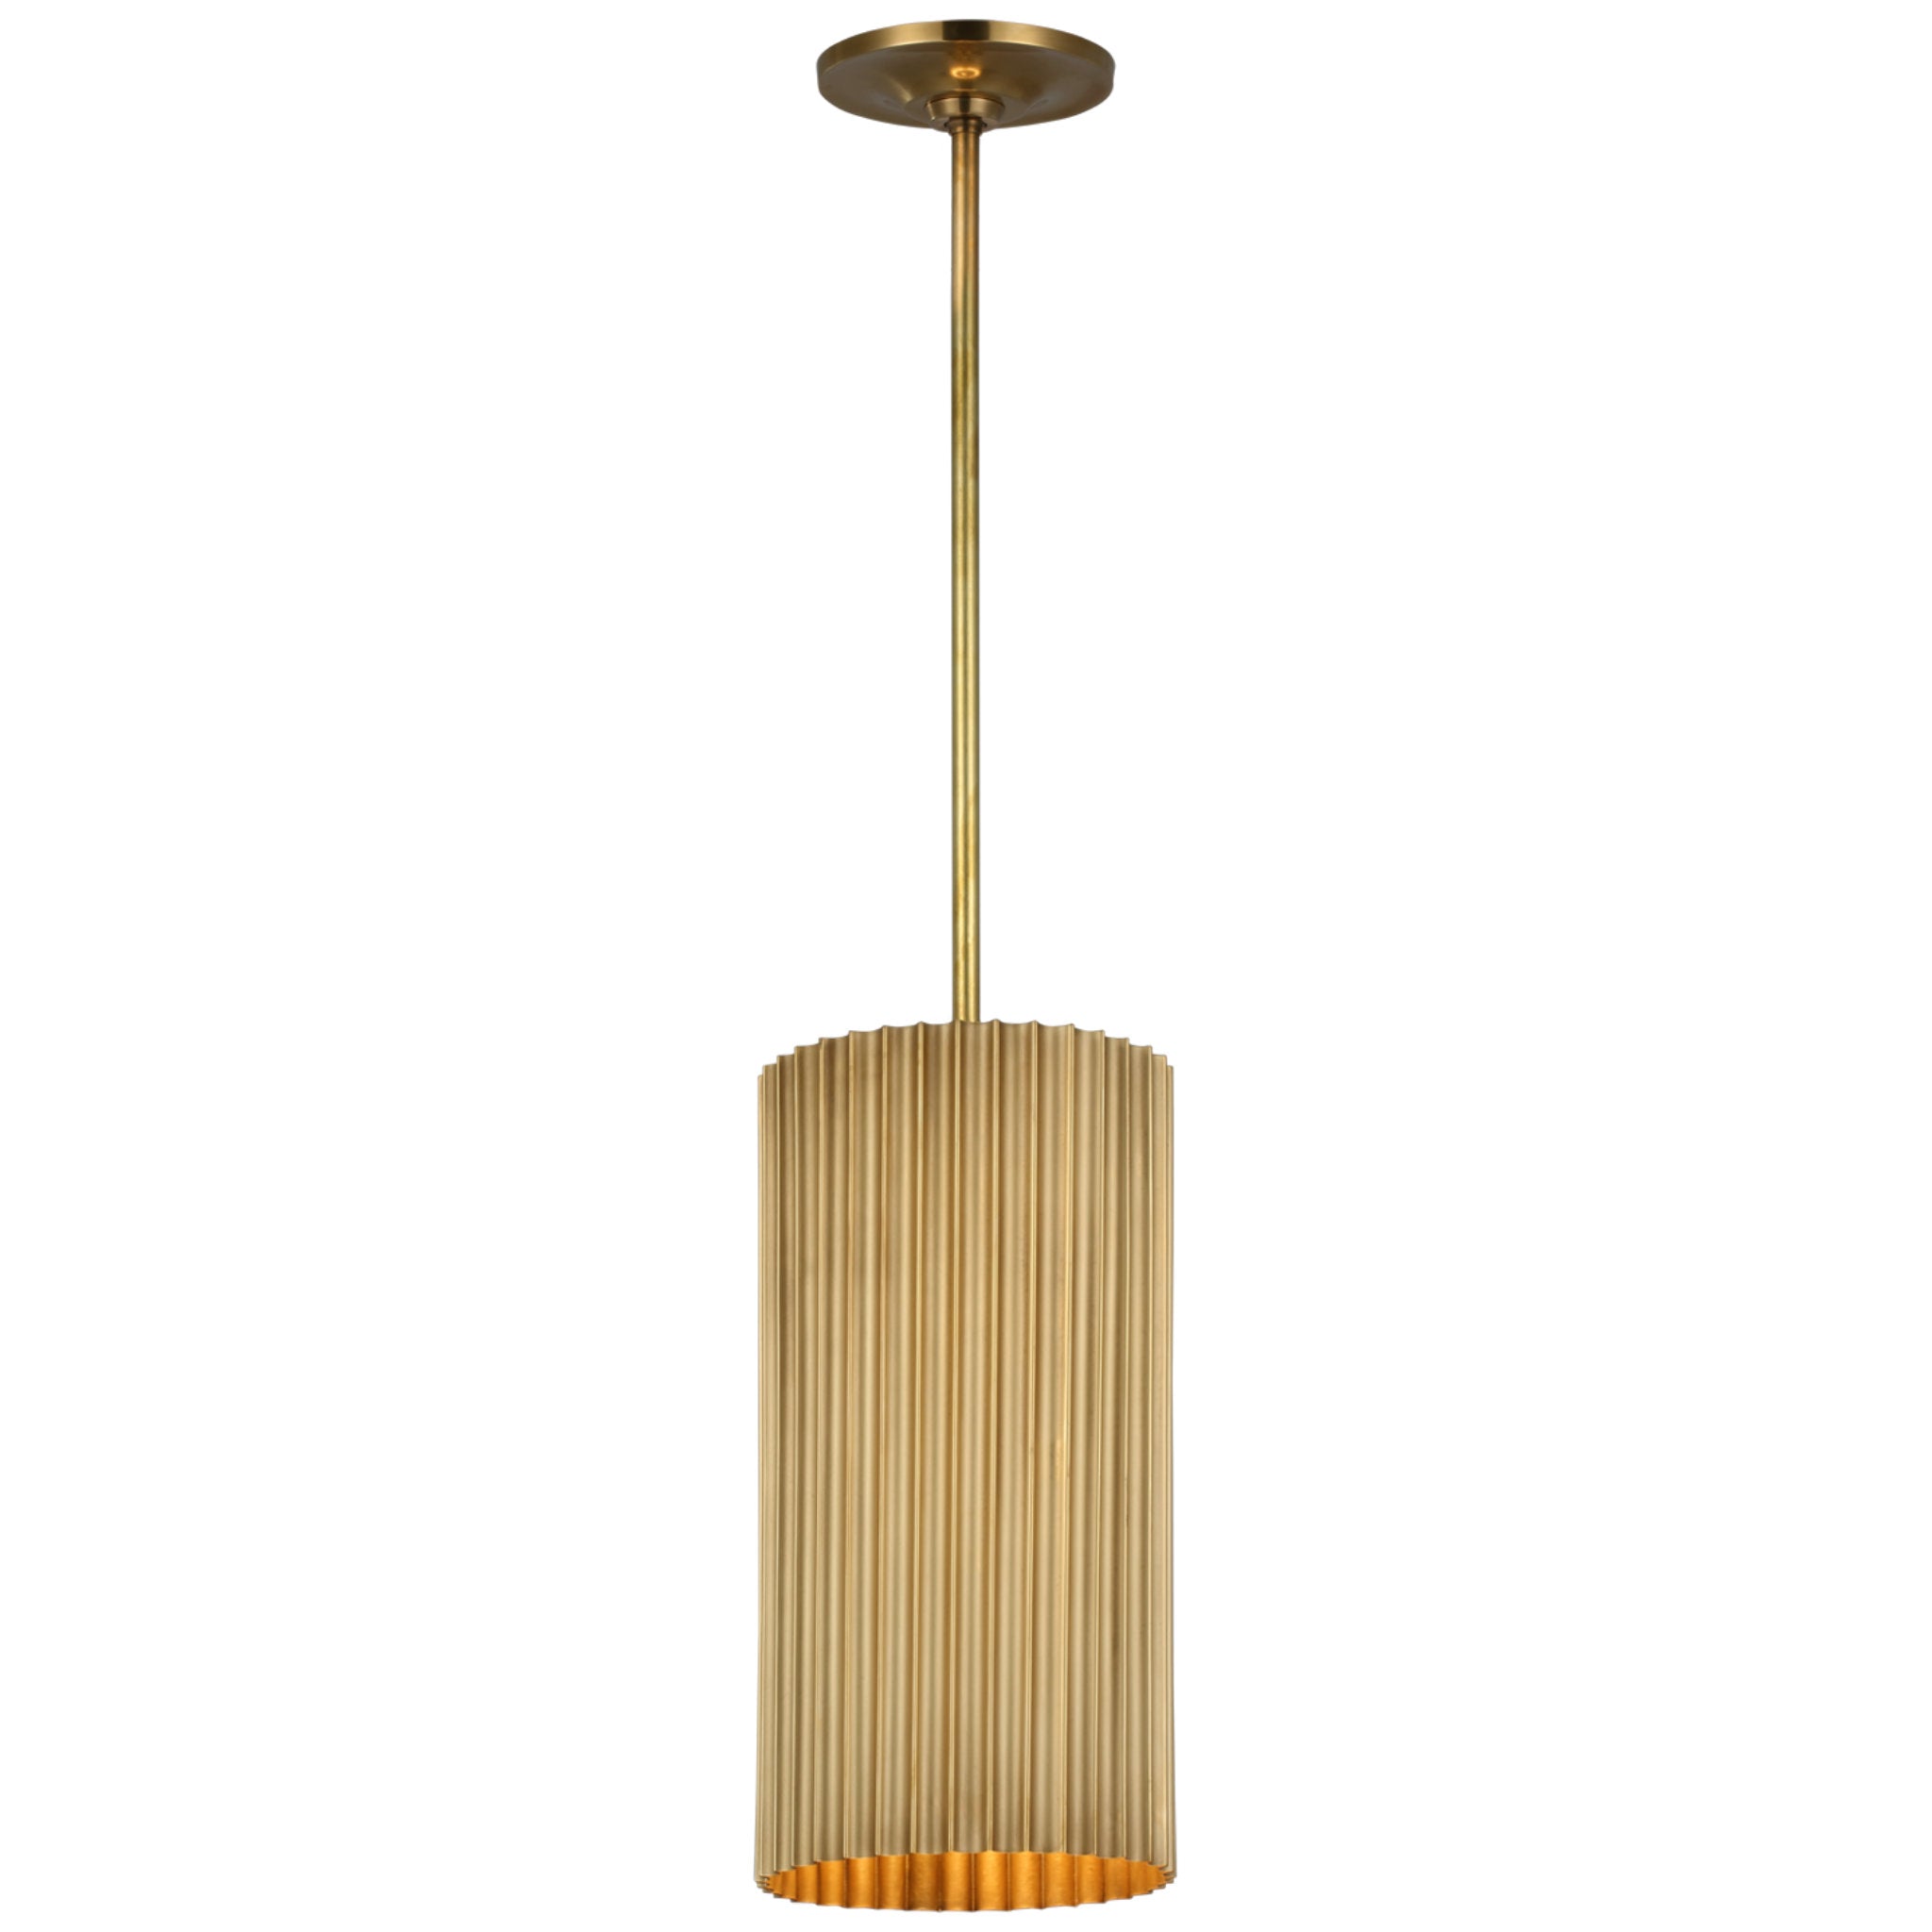 Marie Flanigan Rivers Small Fluted Pendant in Soft Brass